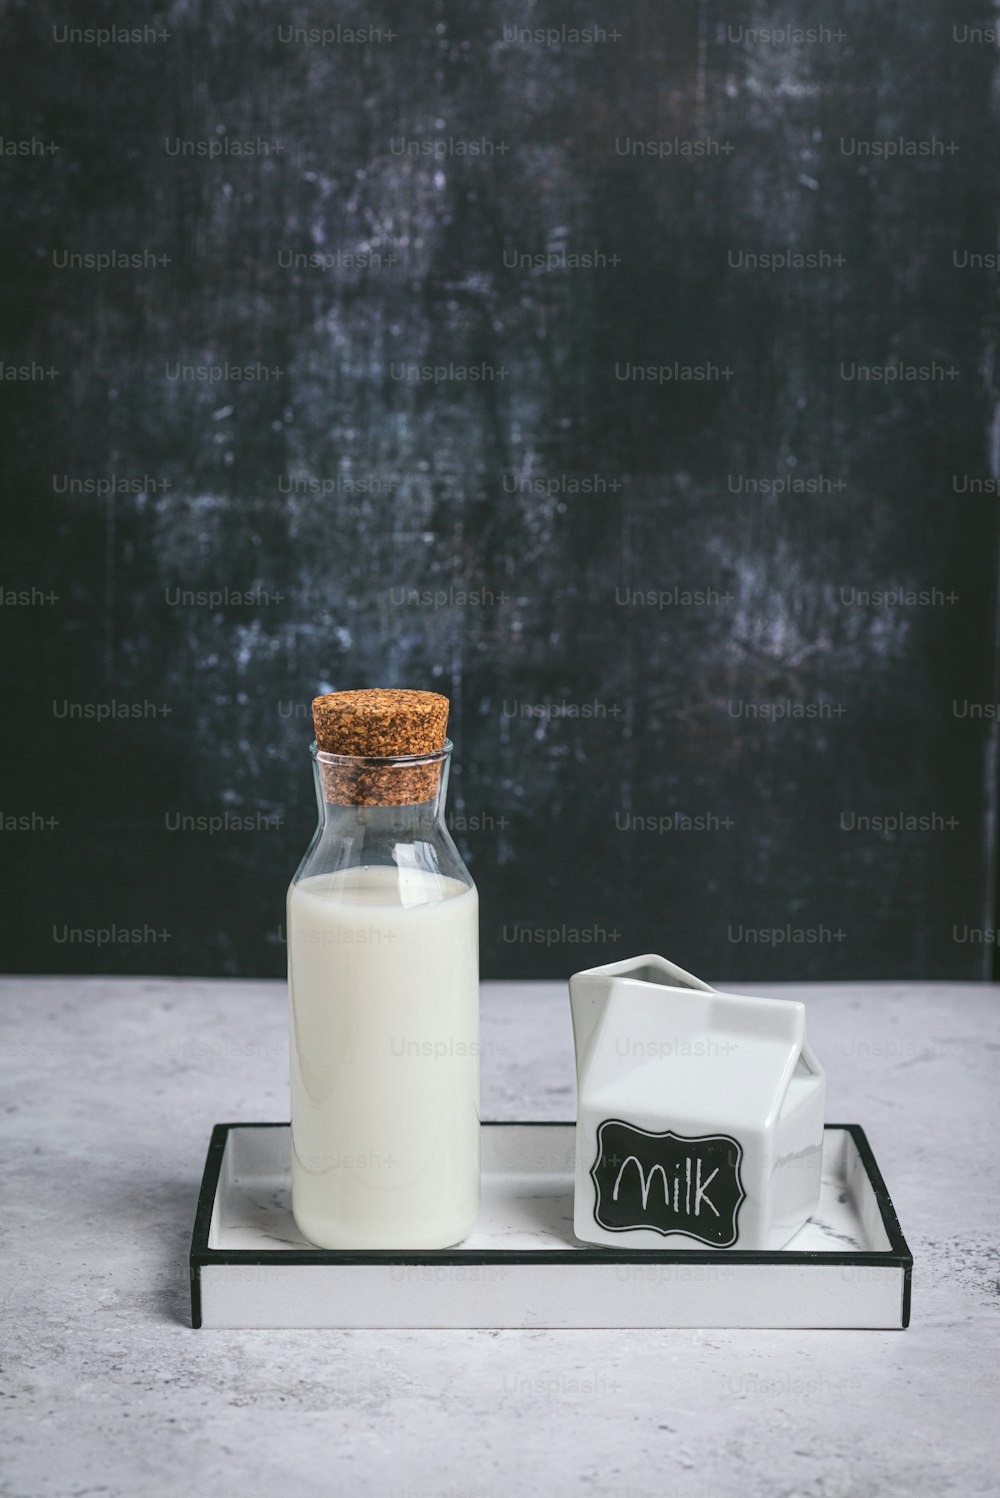 a bottle of milk and a glass of milk on a tray